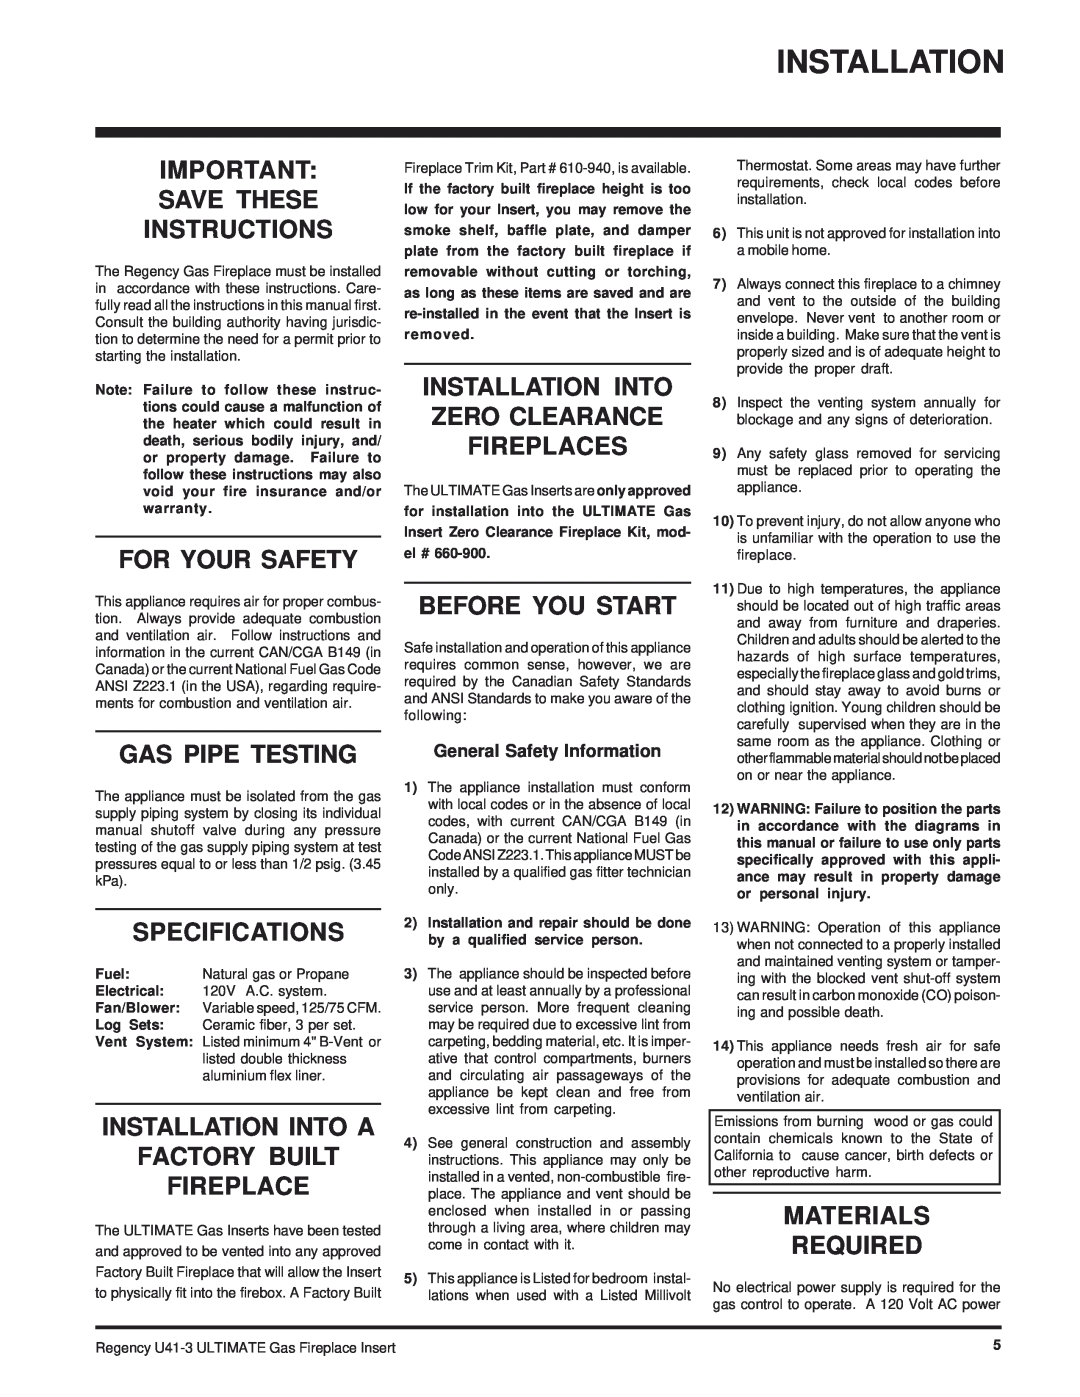 Regency U41-LP3 Save These Instructions, For Your Safety, Gas Pipe Testing, Specifications, Before You Start, removed 